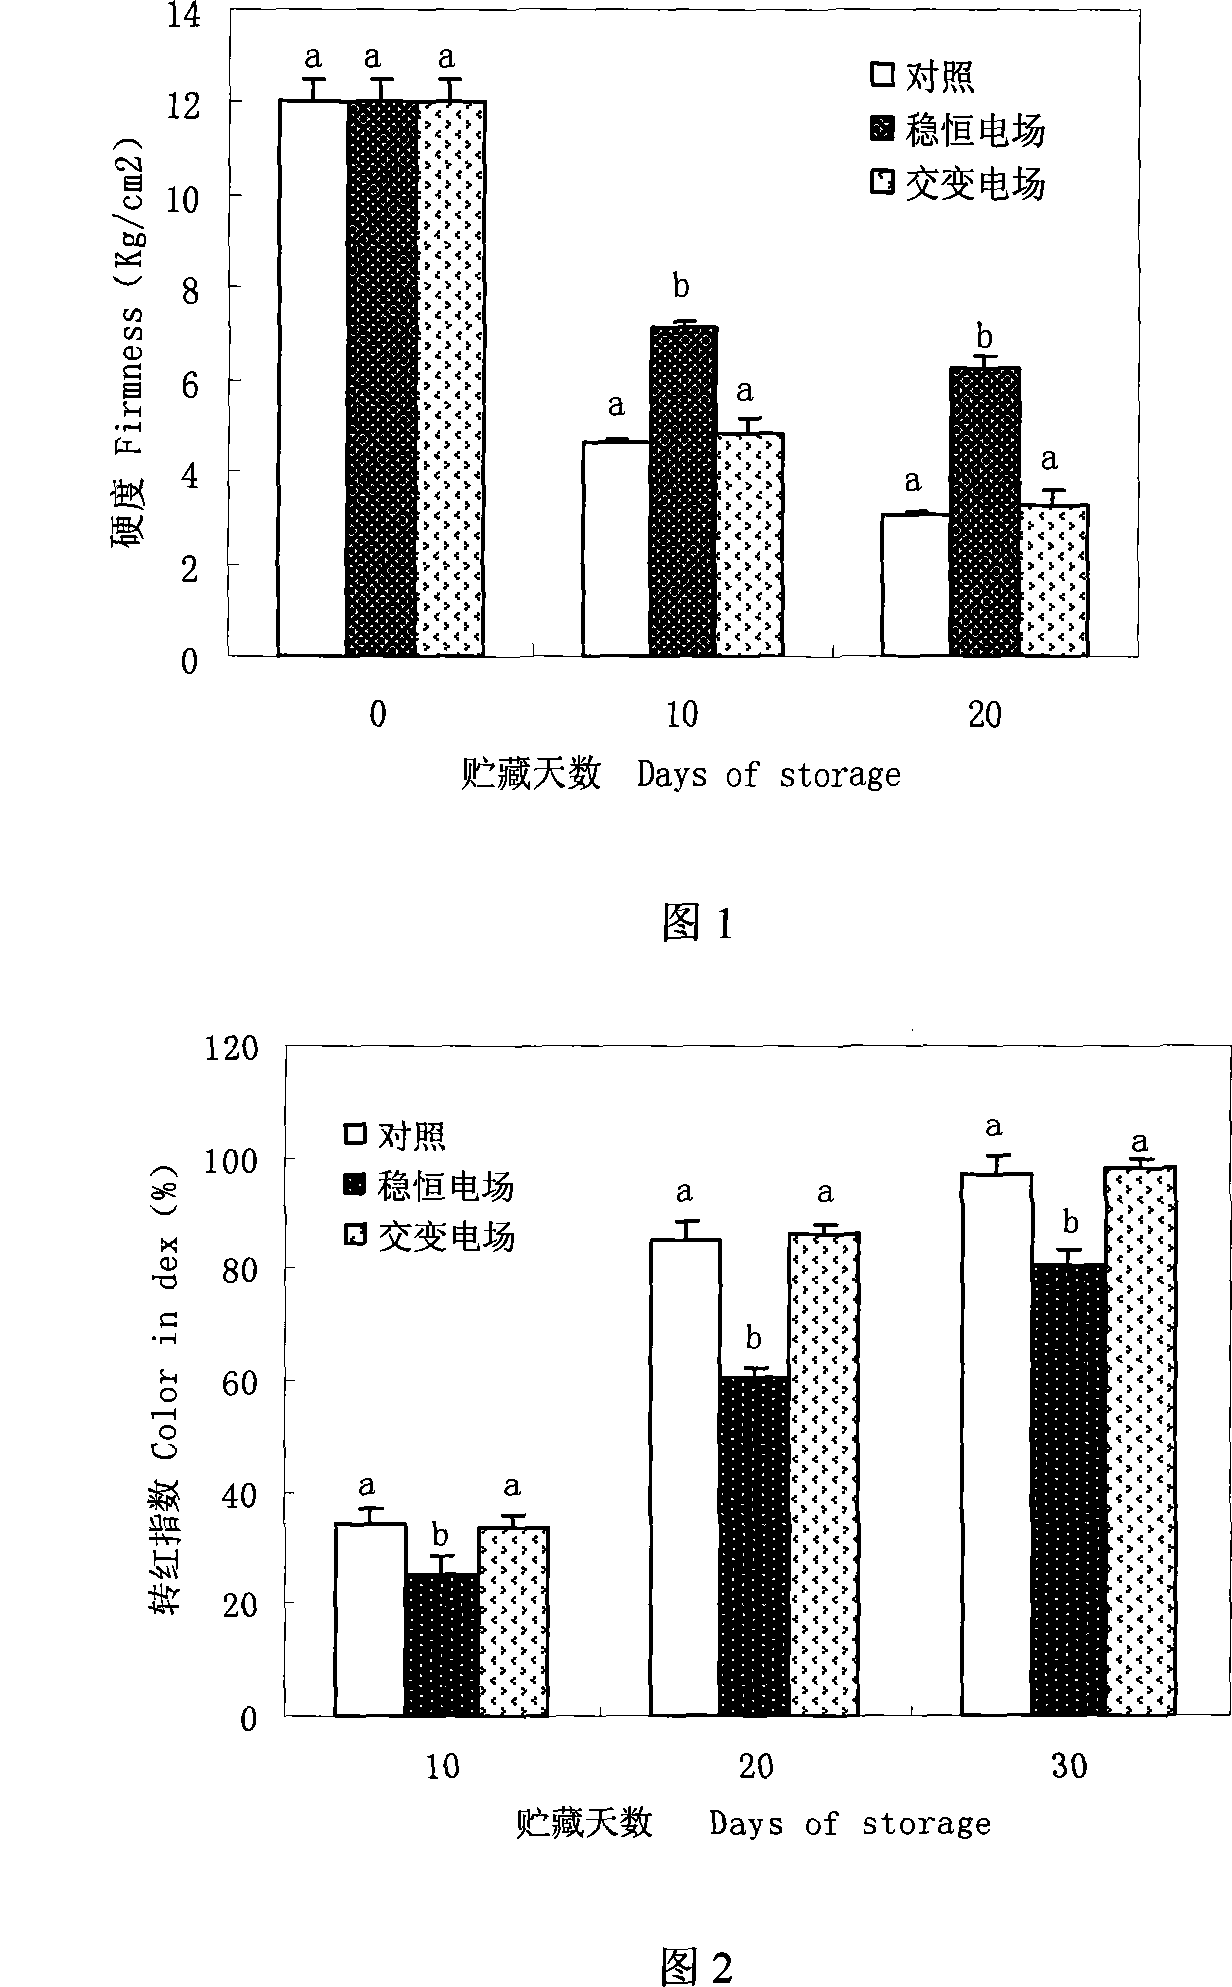 Method for treating tomato utilizing high pressure alternation electric field